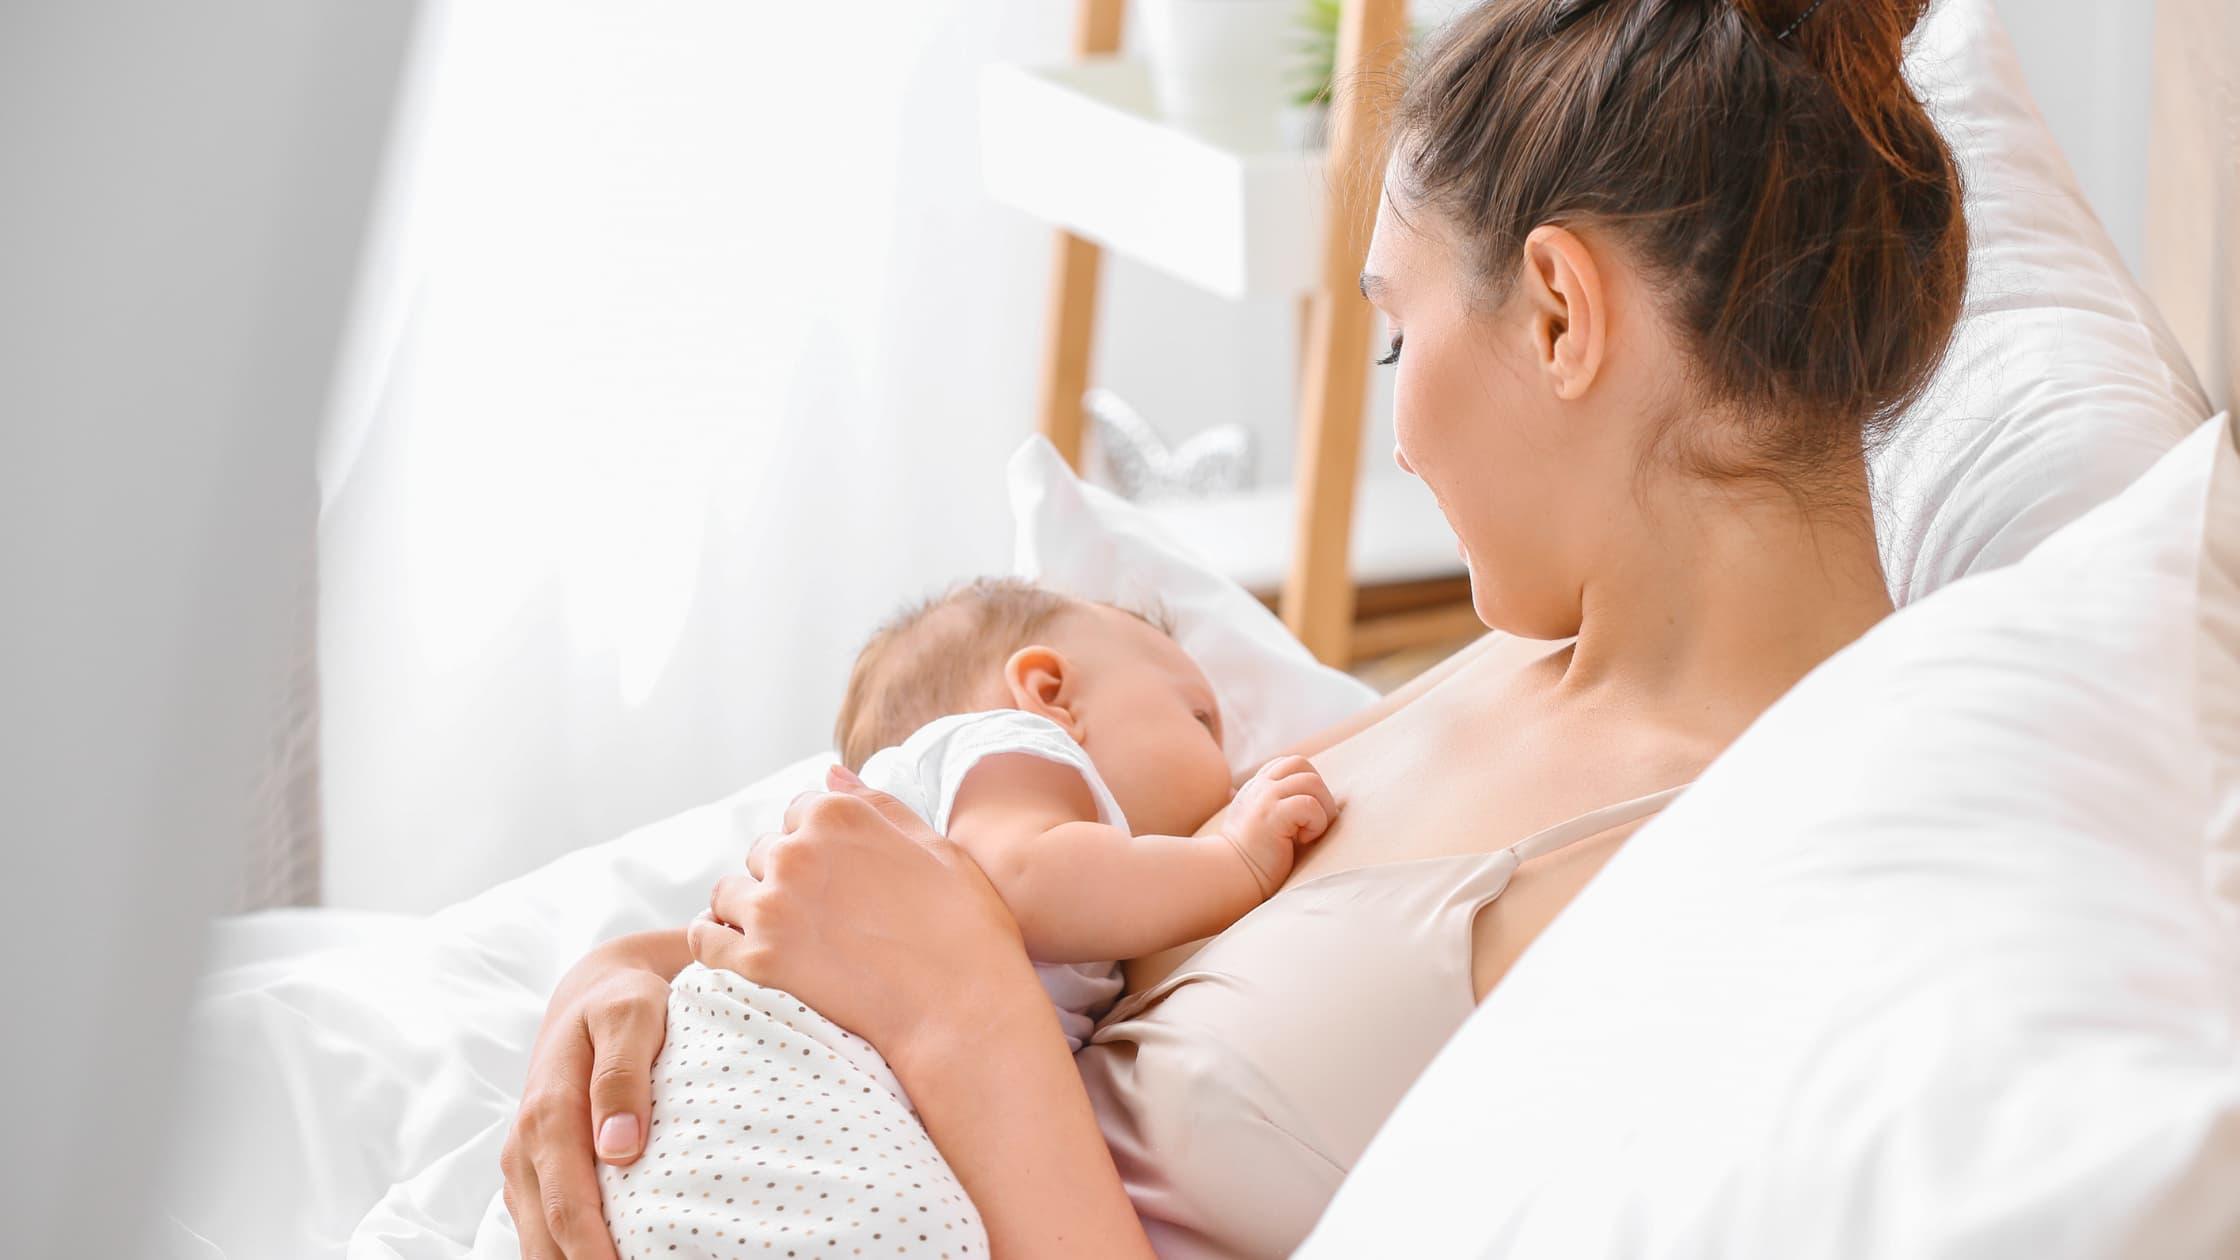 Breastfeeding Your Newborn: Common Challenges and Solutions